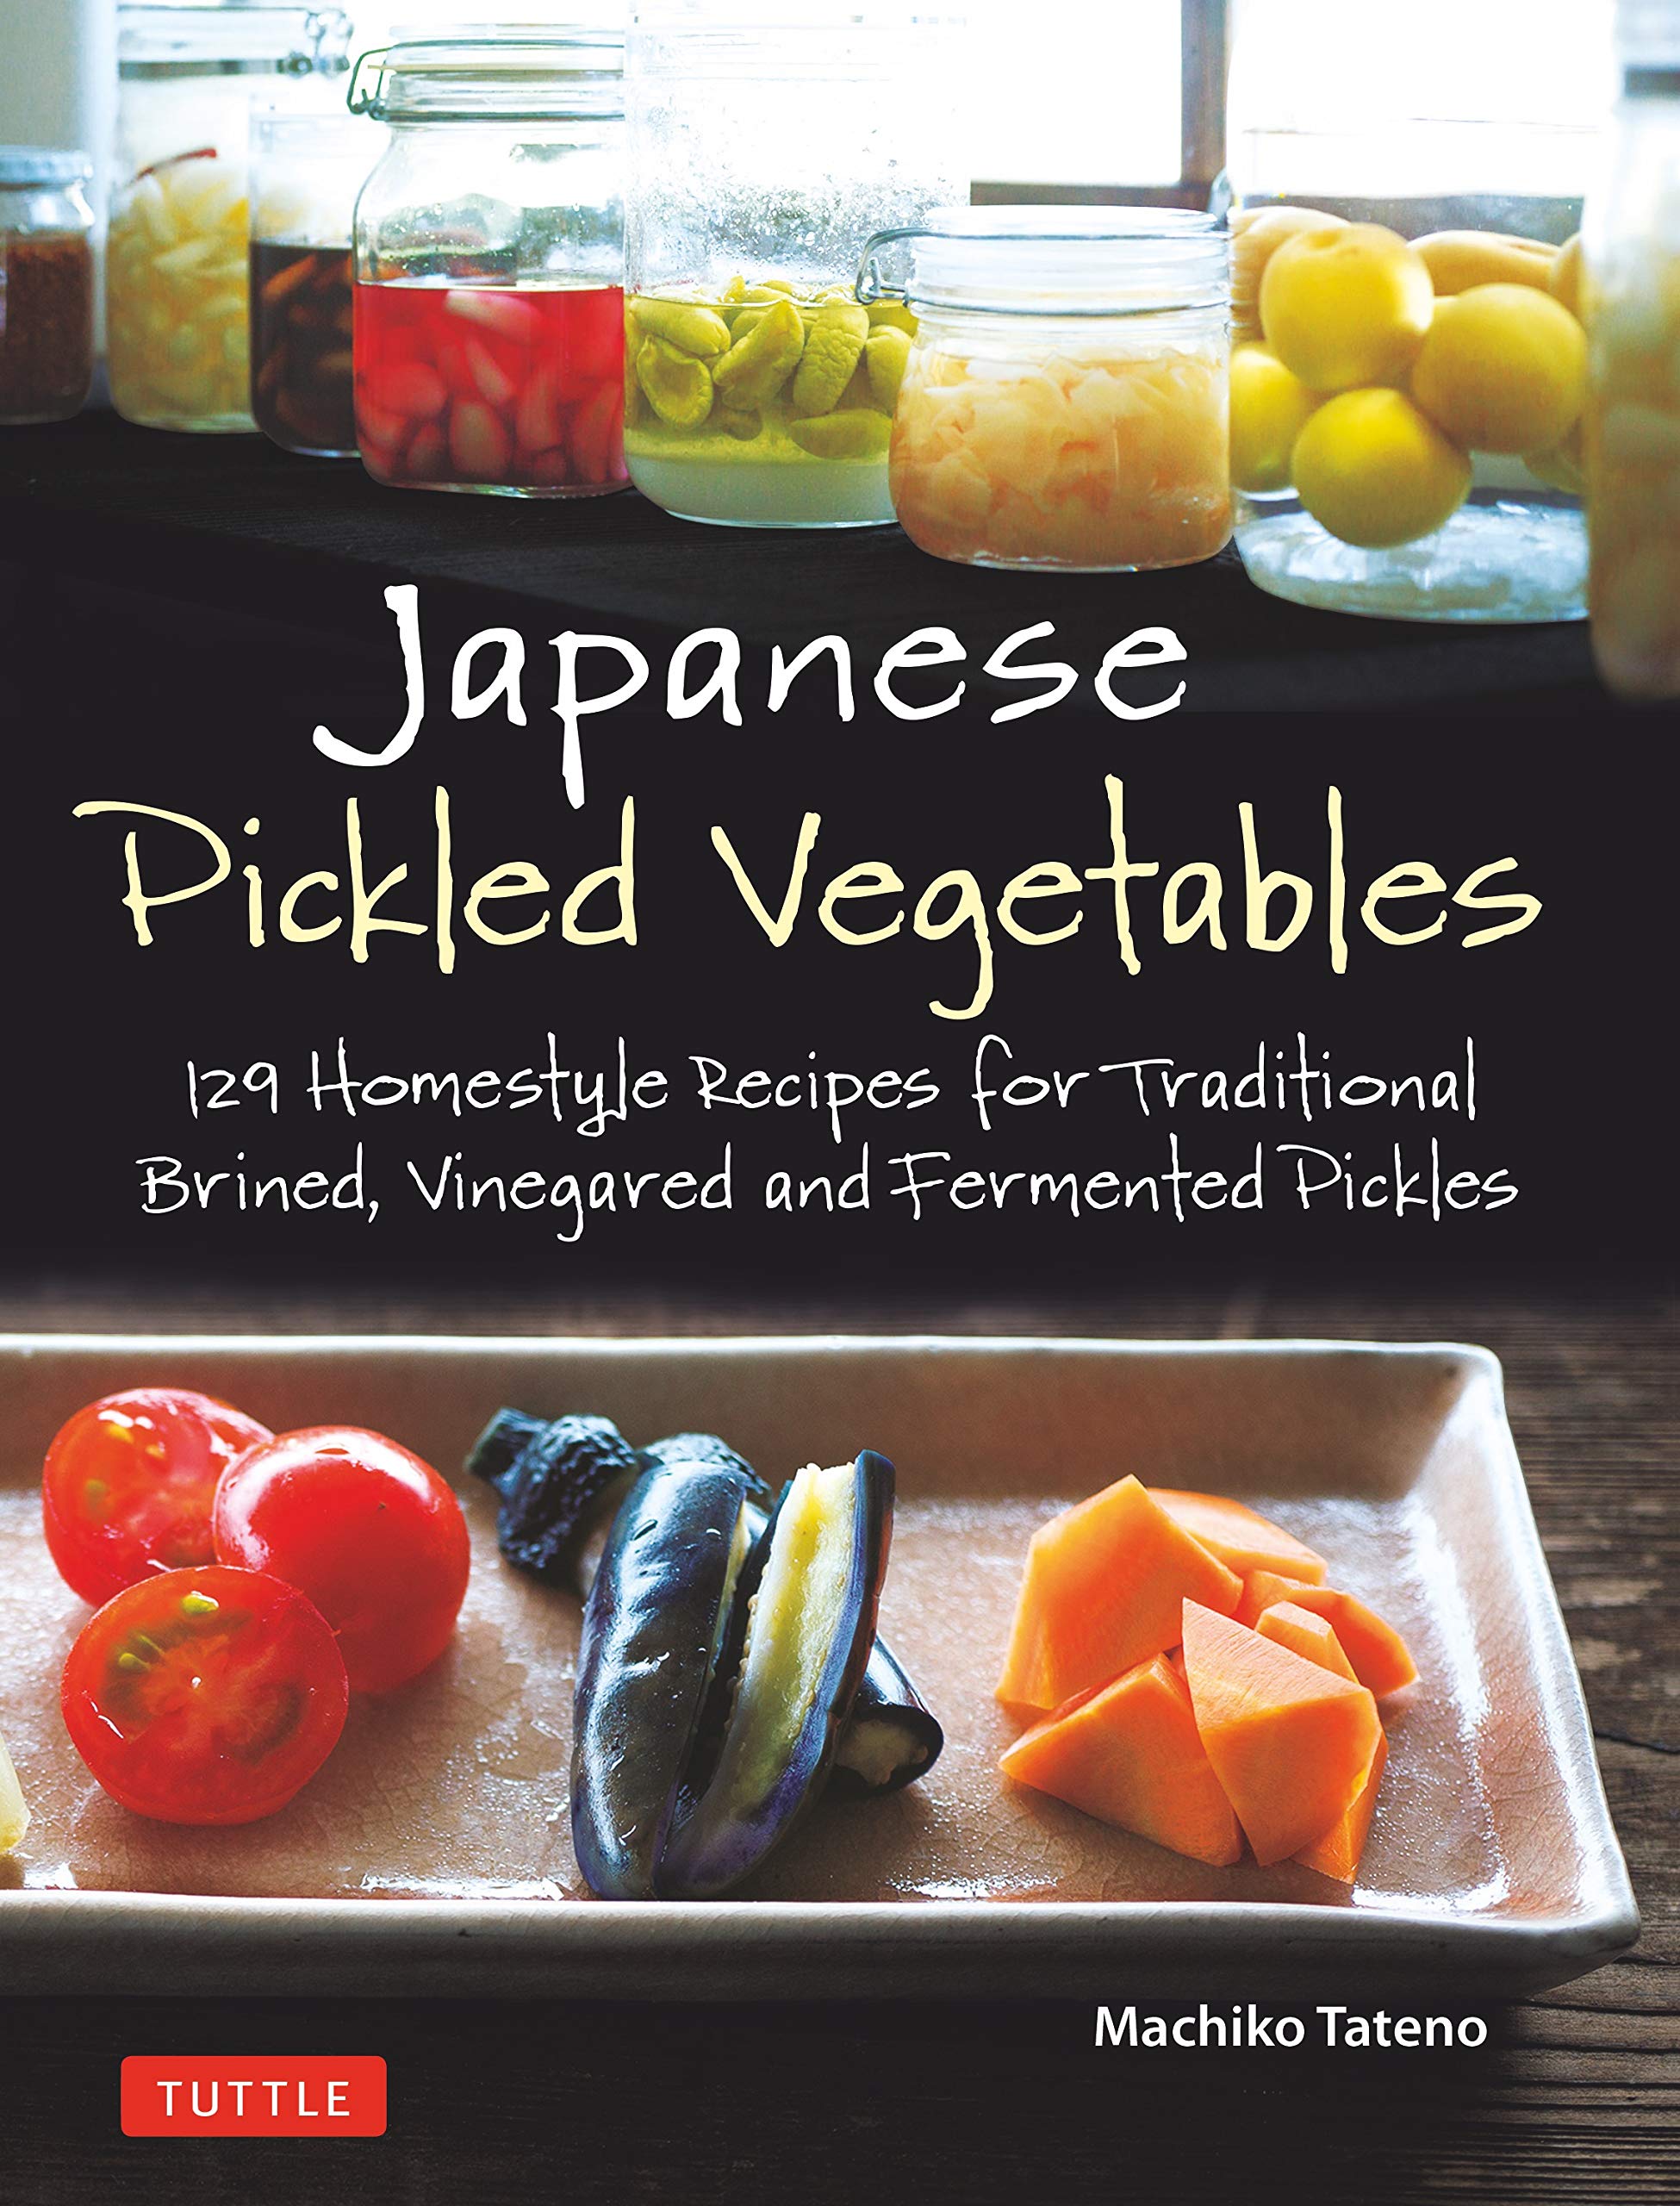 Japanese Pickled Vegetables: 129 Homestyle Recipes for Traditional Brined, Vinegared and Fermented Pickles (Machiko Tateno)